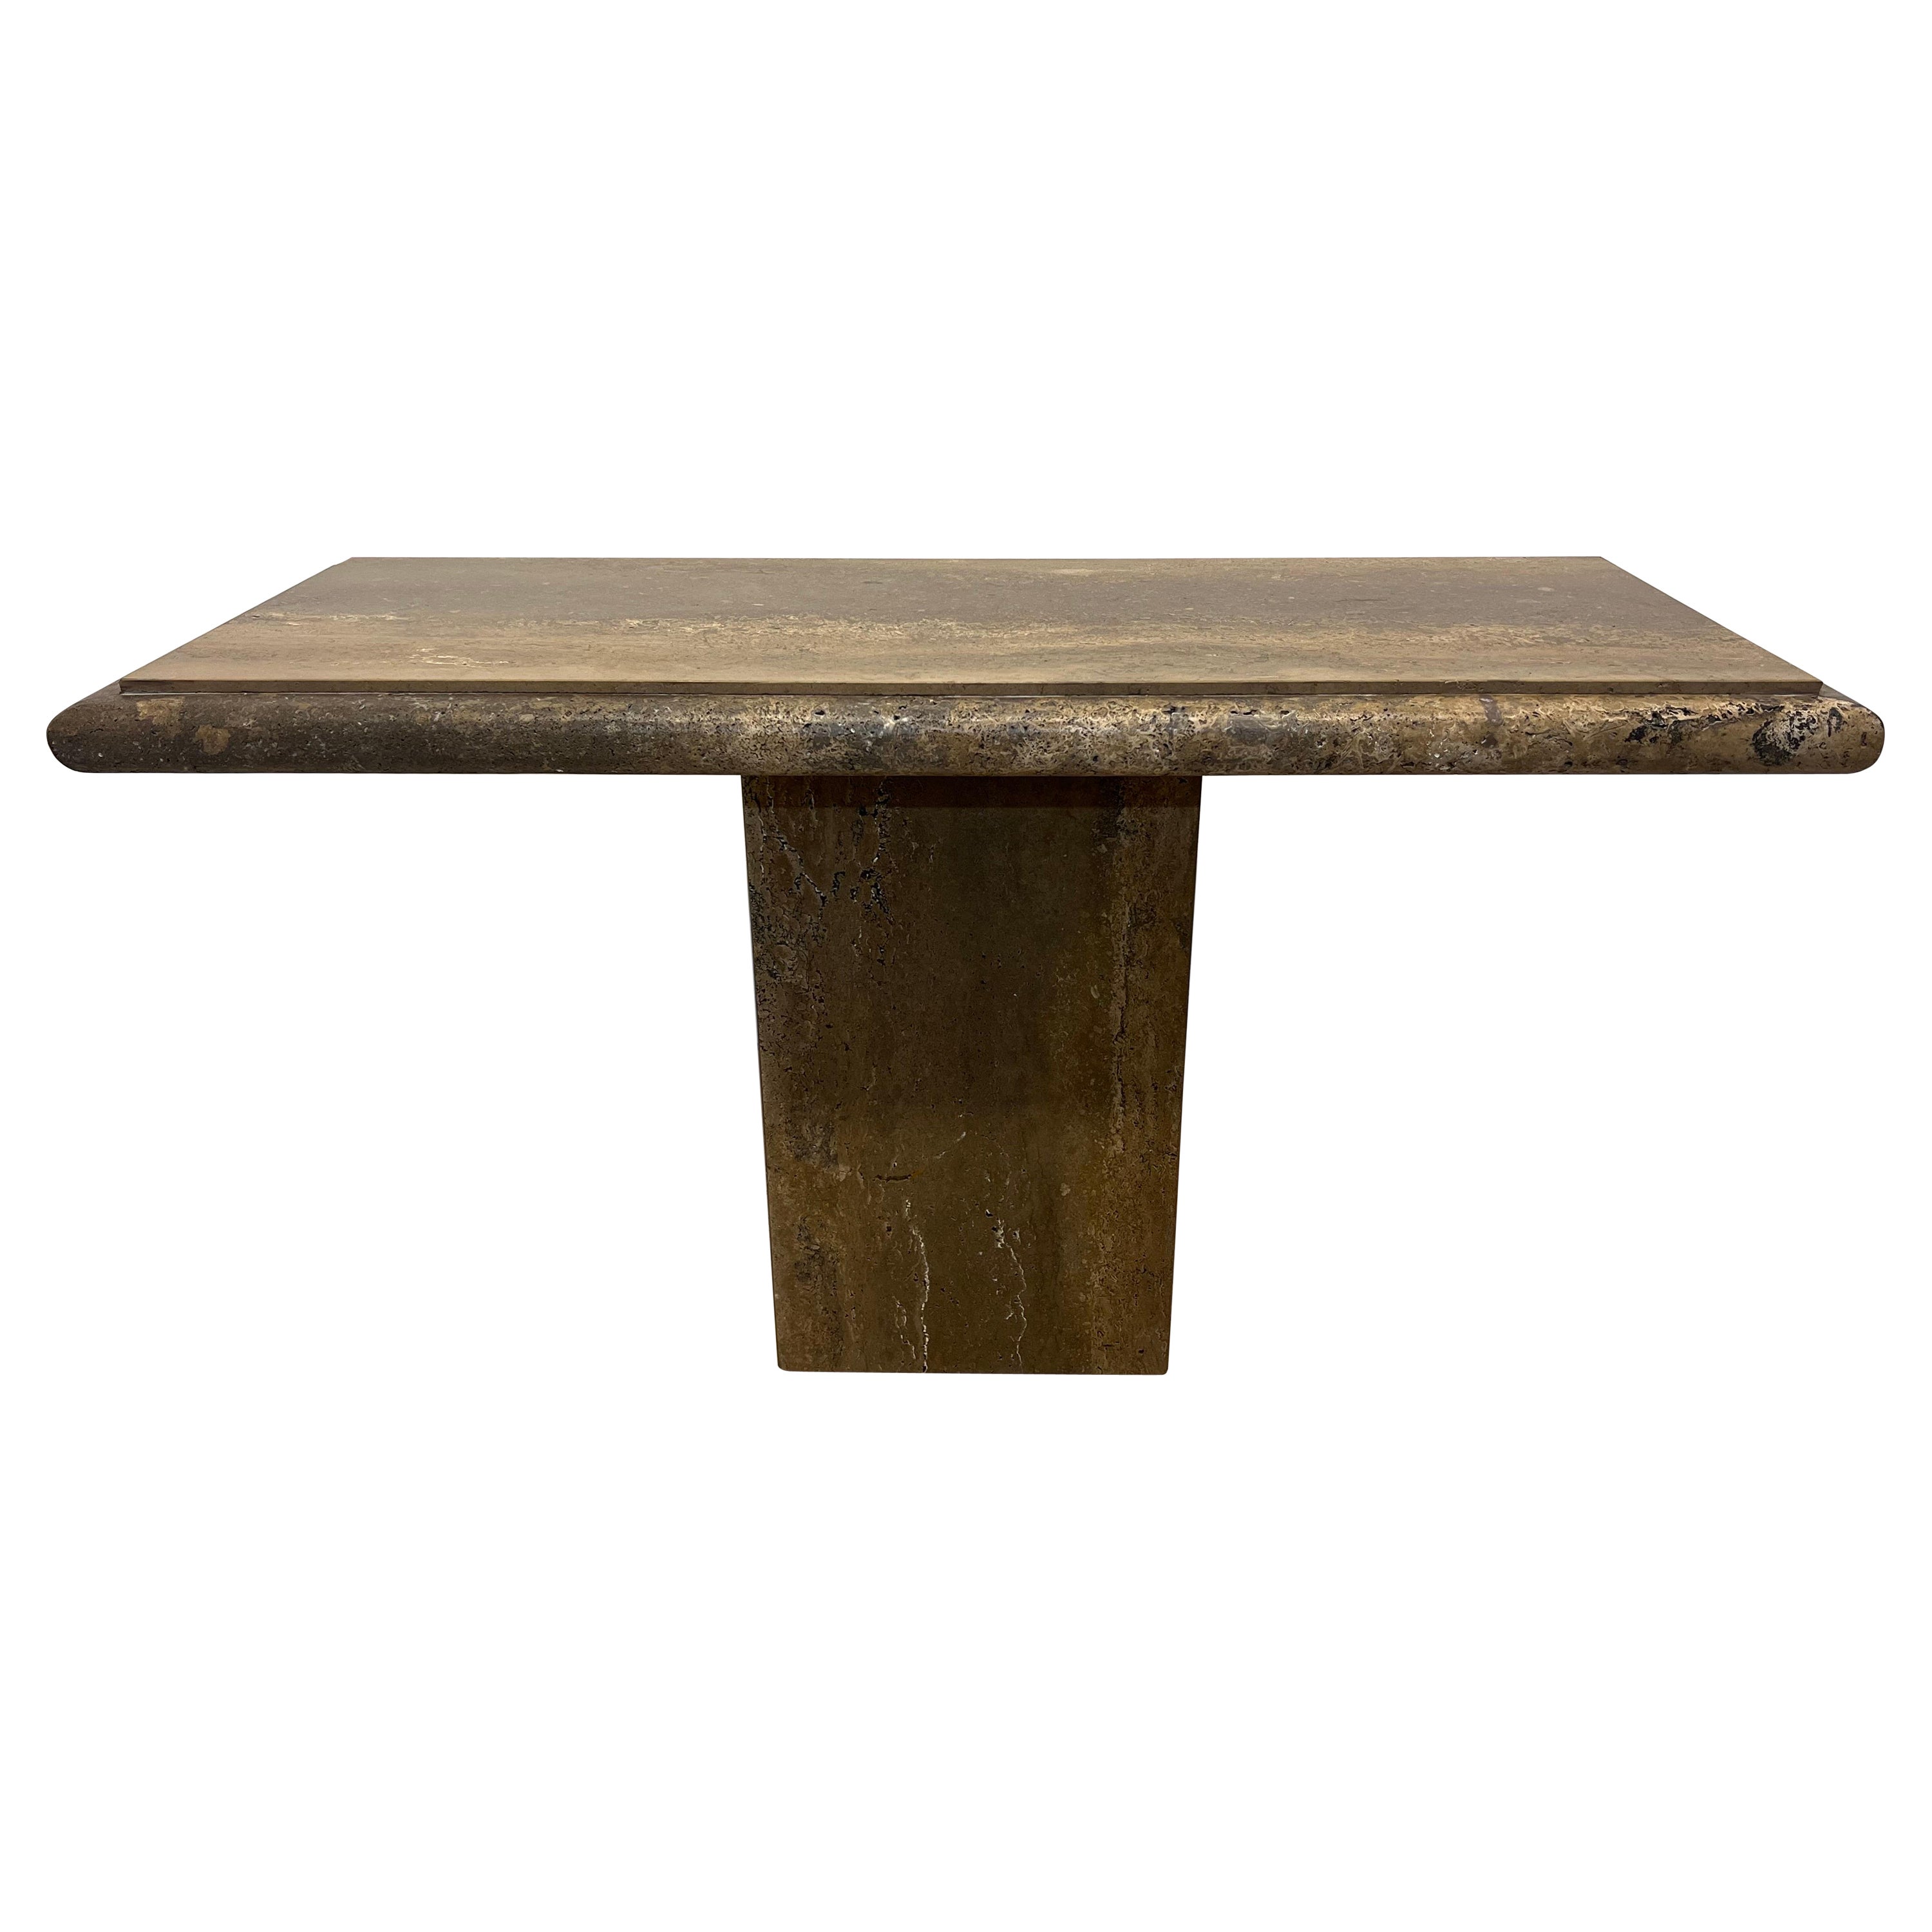 Polished Italian Travertine Bullnose Console Table, Italy 1970s